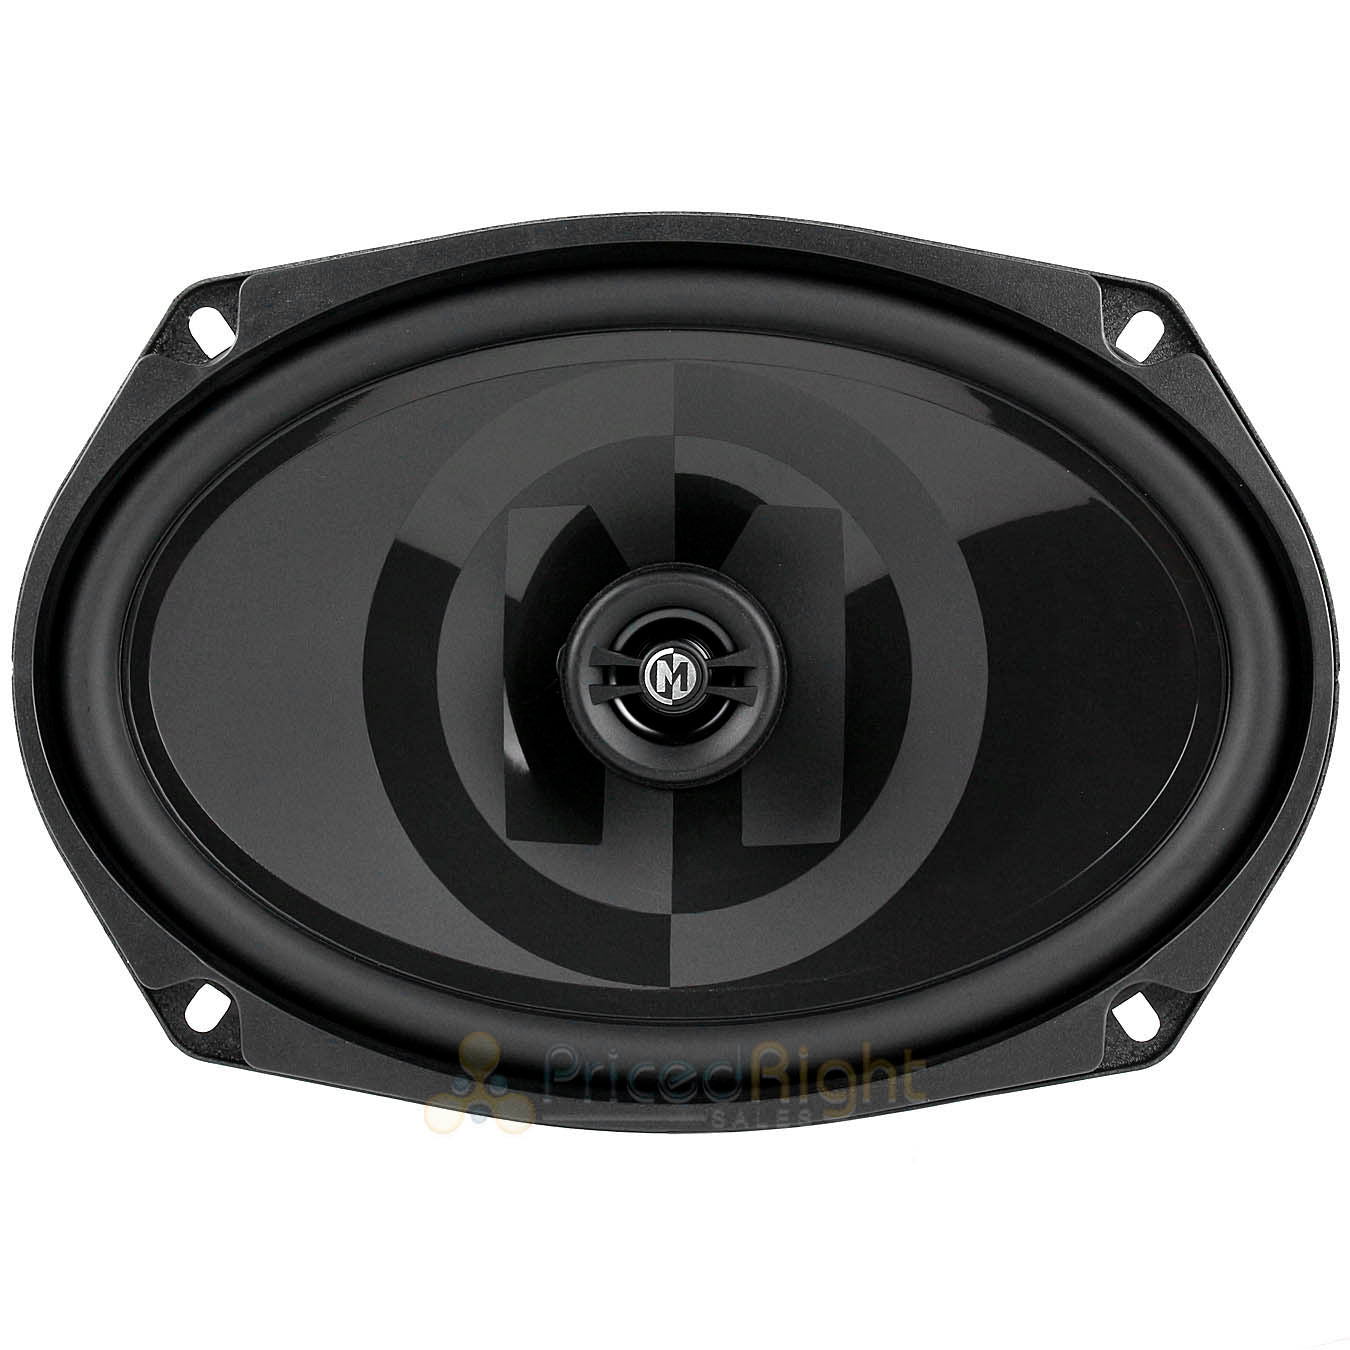 4 Pack Memphis Audio 6x9" 2 Way Coaxial Speakers Power Reference Series 50W RMS